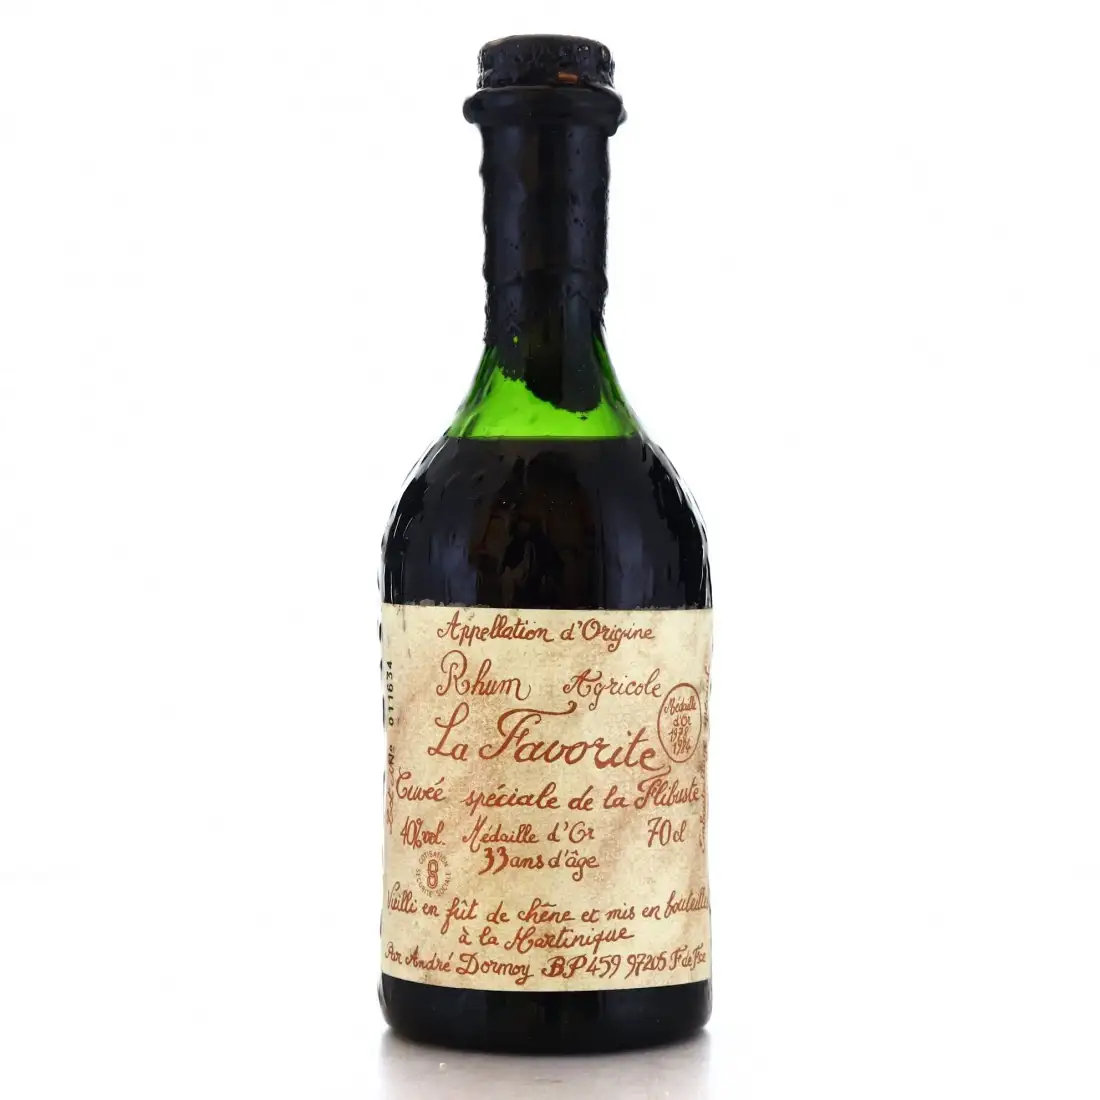 Image of the front of the bottle of the rum La Flibuste Old Cuvee Speciale